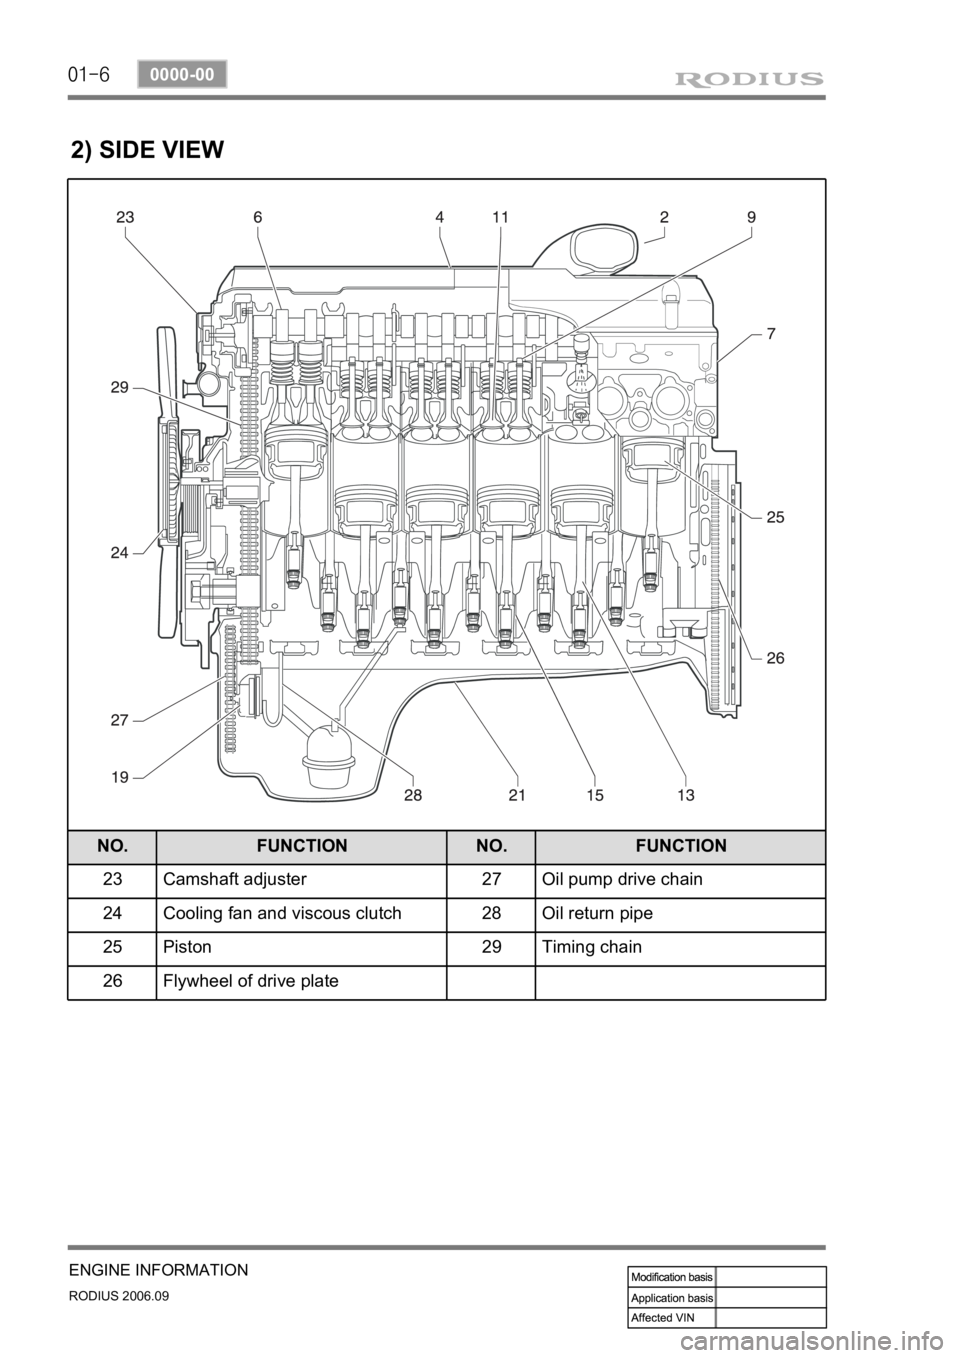 SSANGYONG RODIUS 2007  Service Manual 01-6
RODIUS 2006.09
0000-00
ENGINE INFORMATION
2) SIDE VIEW
NO. FUNCTION NO. FUNCTION
23 Camshaft adjuster 27 Oil pump drive chain
24 Cooling fan and viscous clutch 28 Oil return pipe
25 Piston 29 Tim